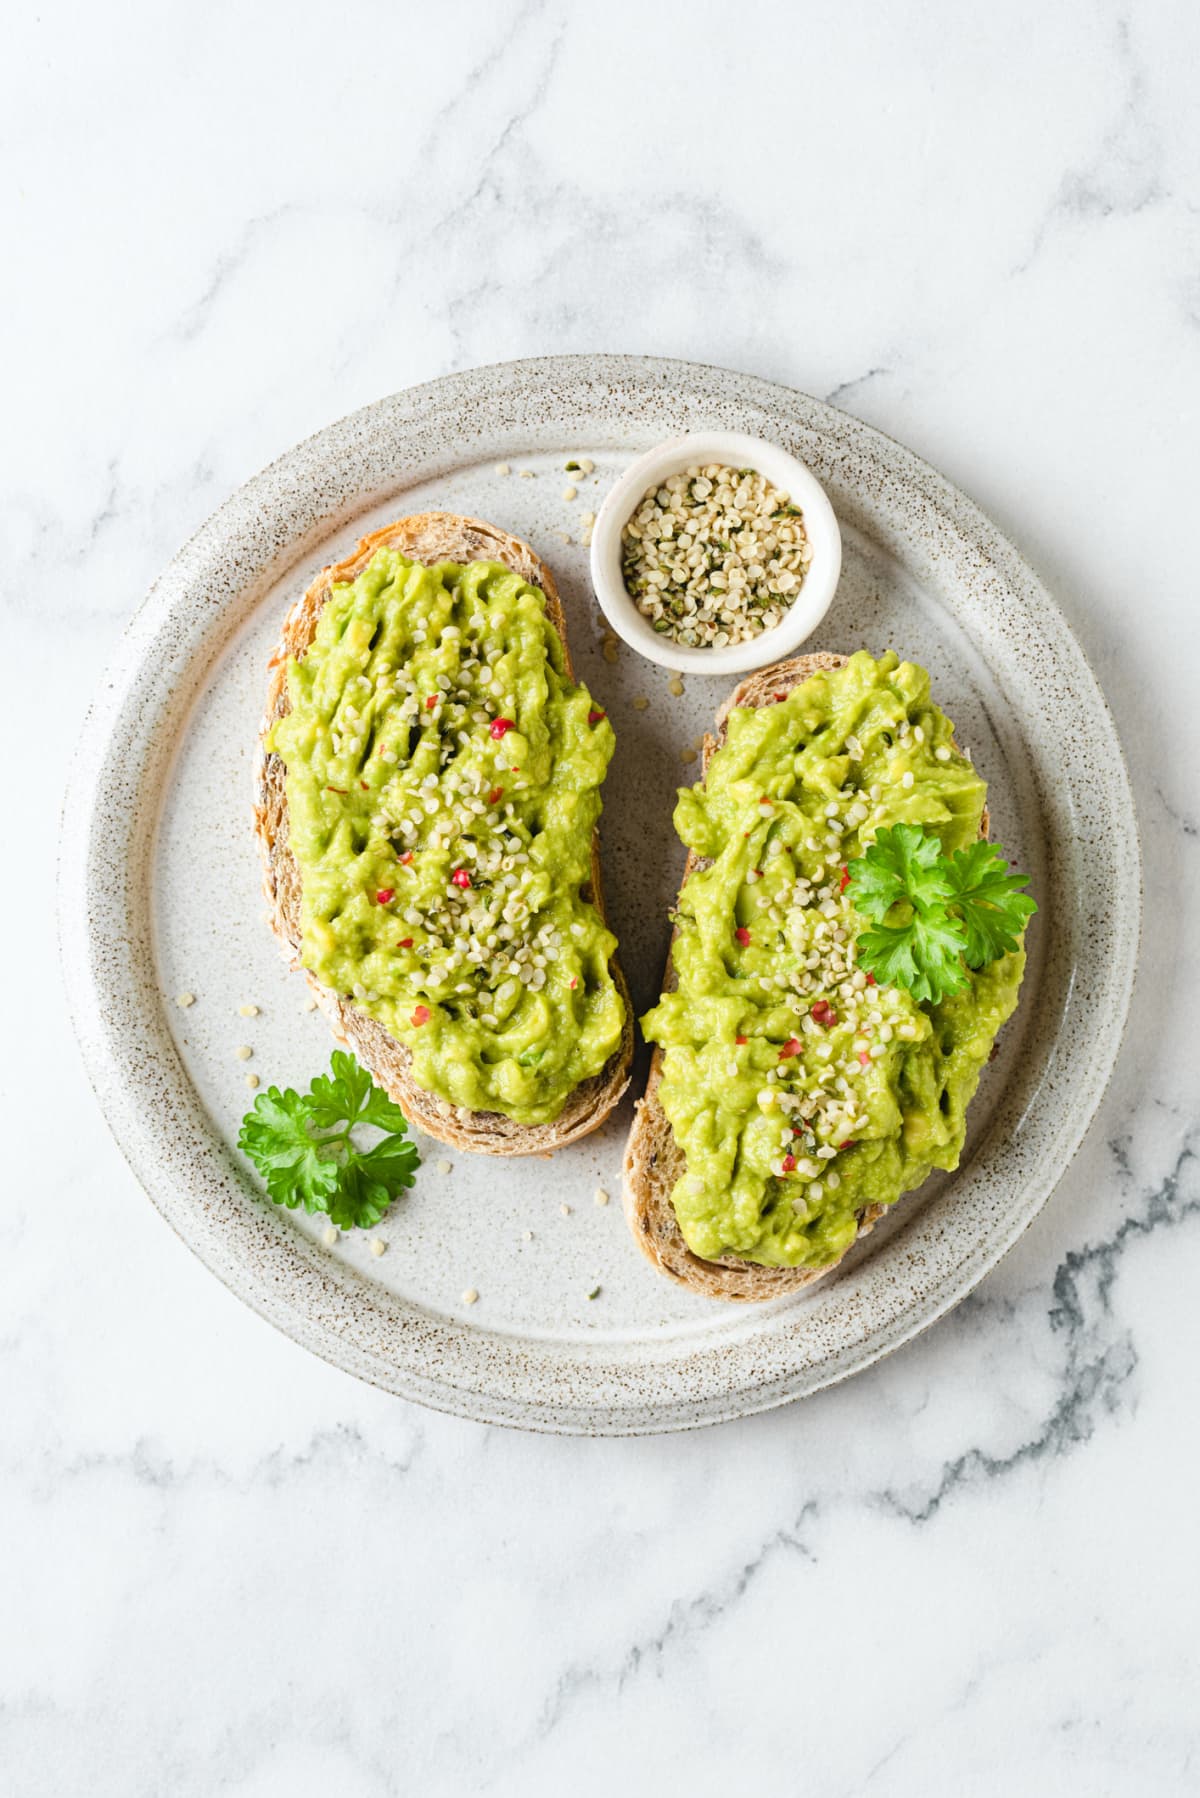 Toast with mashed avocado and hemp seeds on a plate. Healthy vegan snack. Top view, marble background